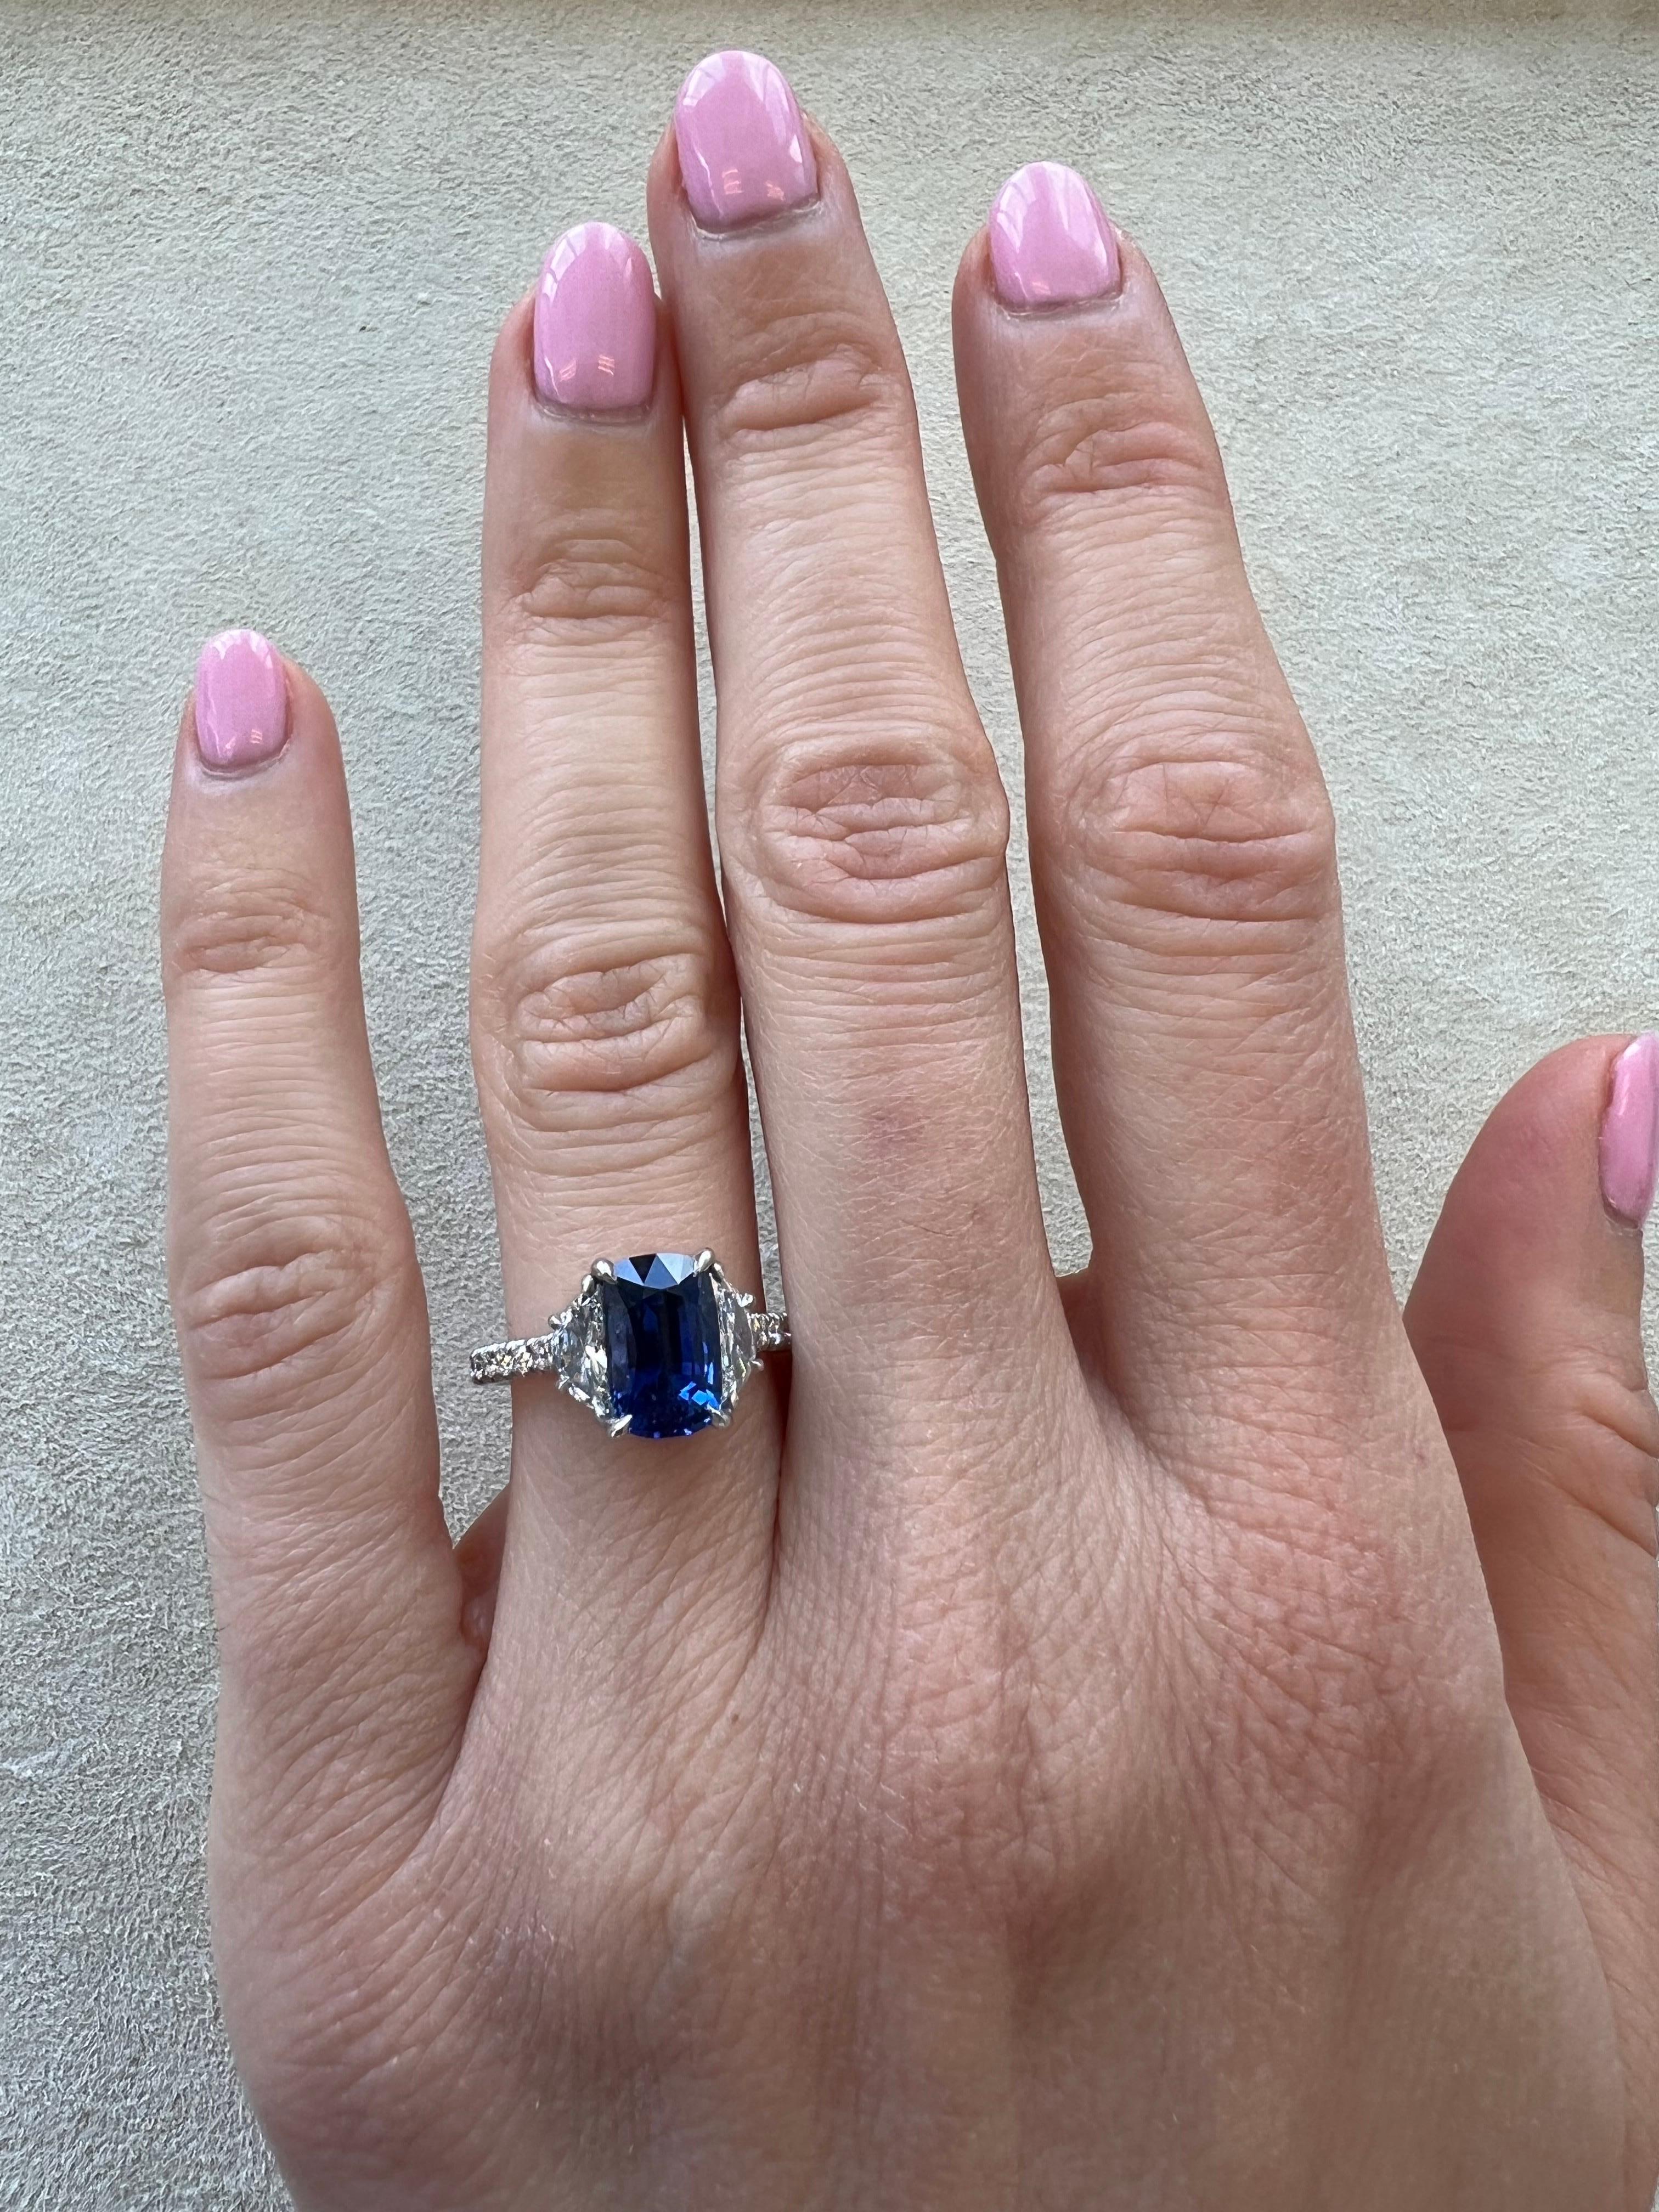 Blue Sapphire Ring 3.12 Carat Cushion Sri Lanka In New Condition For Sale In Beverly Hills, CA